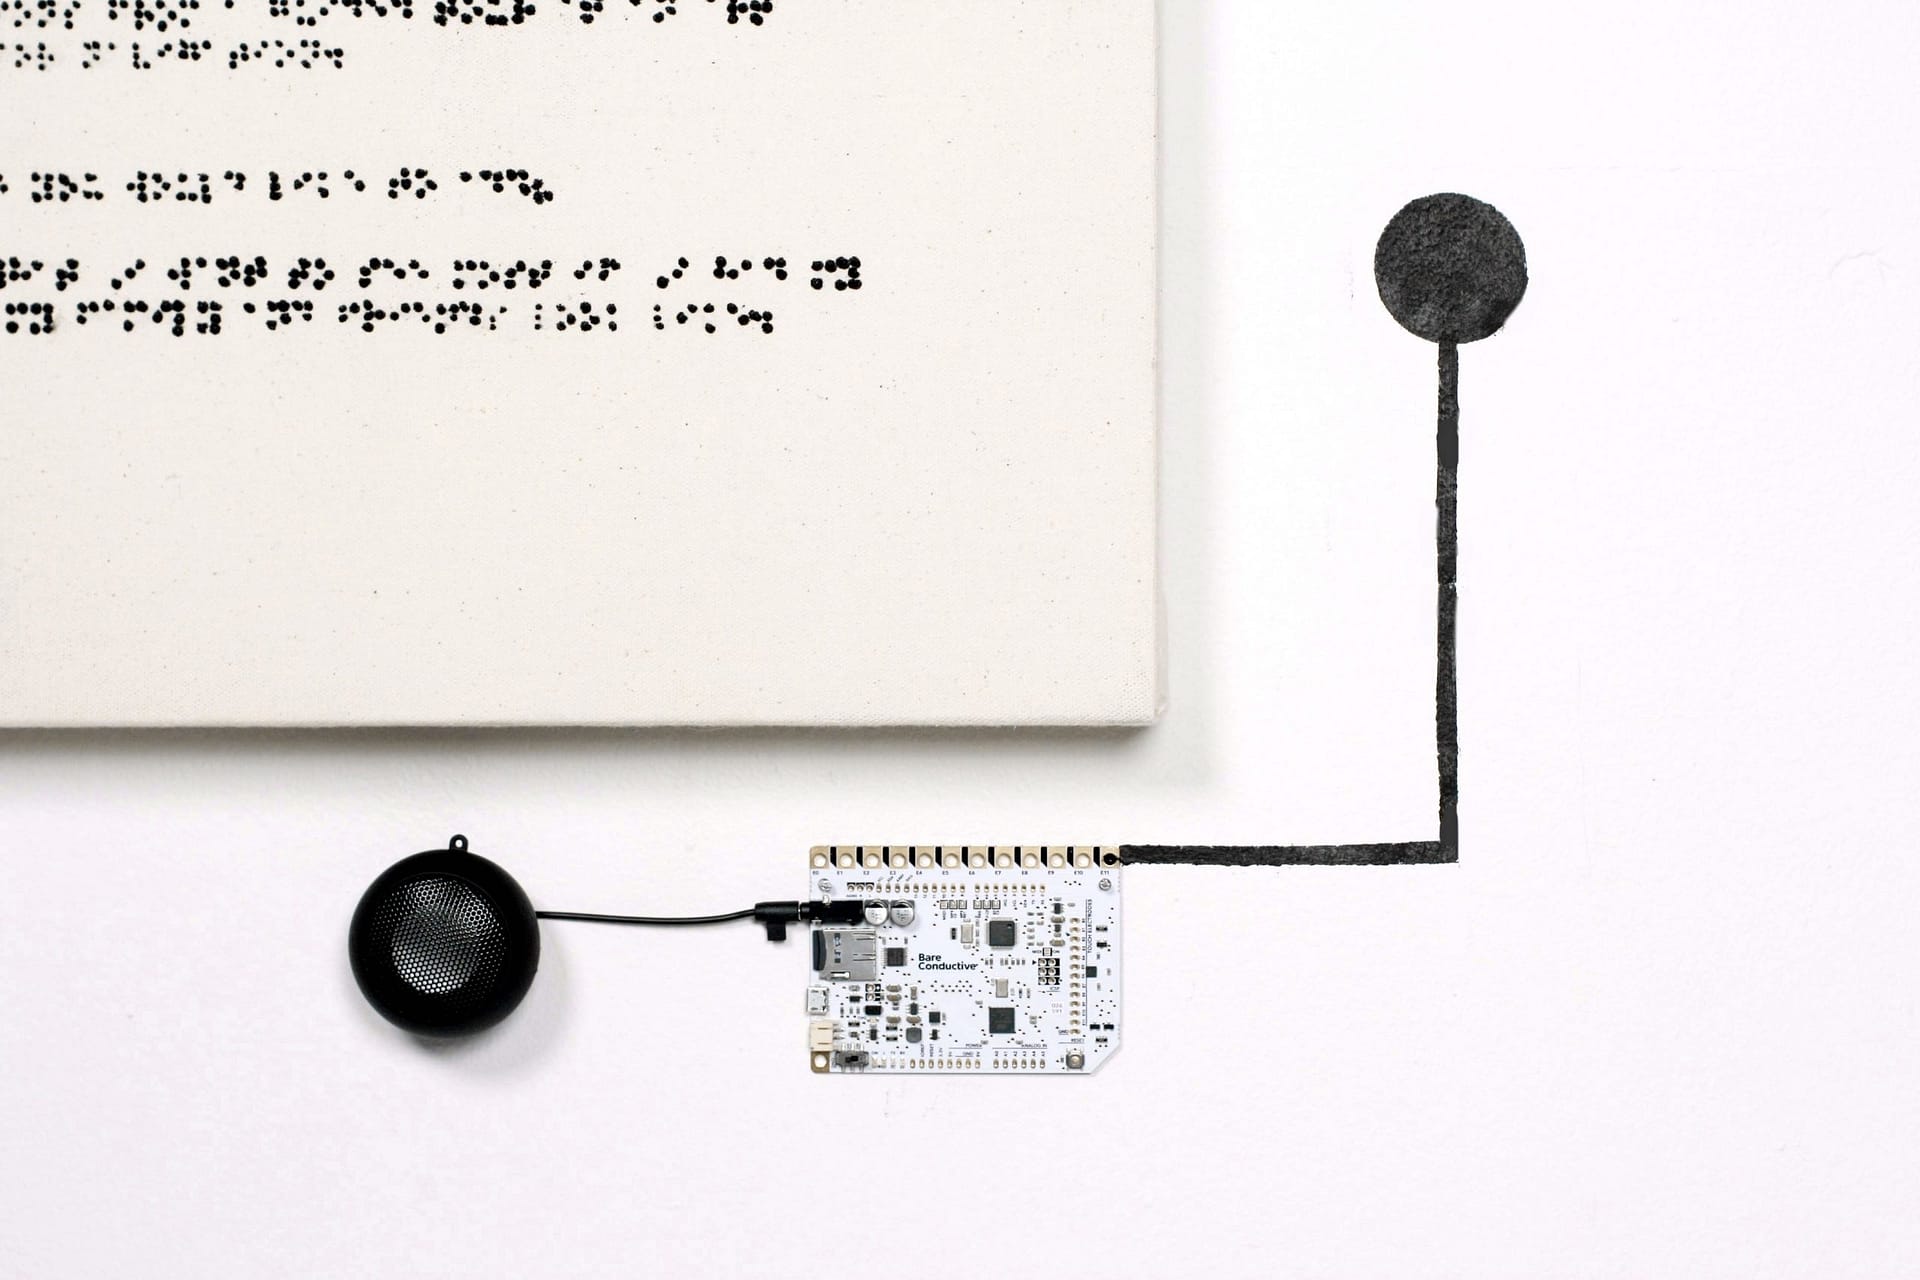 A canvas with Braille text painted with acrylic paint is mounted on a white wall. Mounted below is a small computer is attached to a speaker and conductive paint, indicating a spot to touch and activate sound.